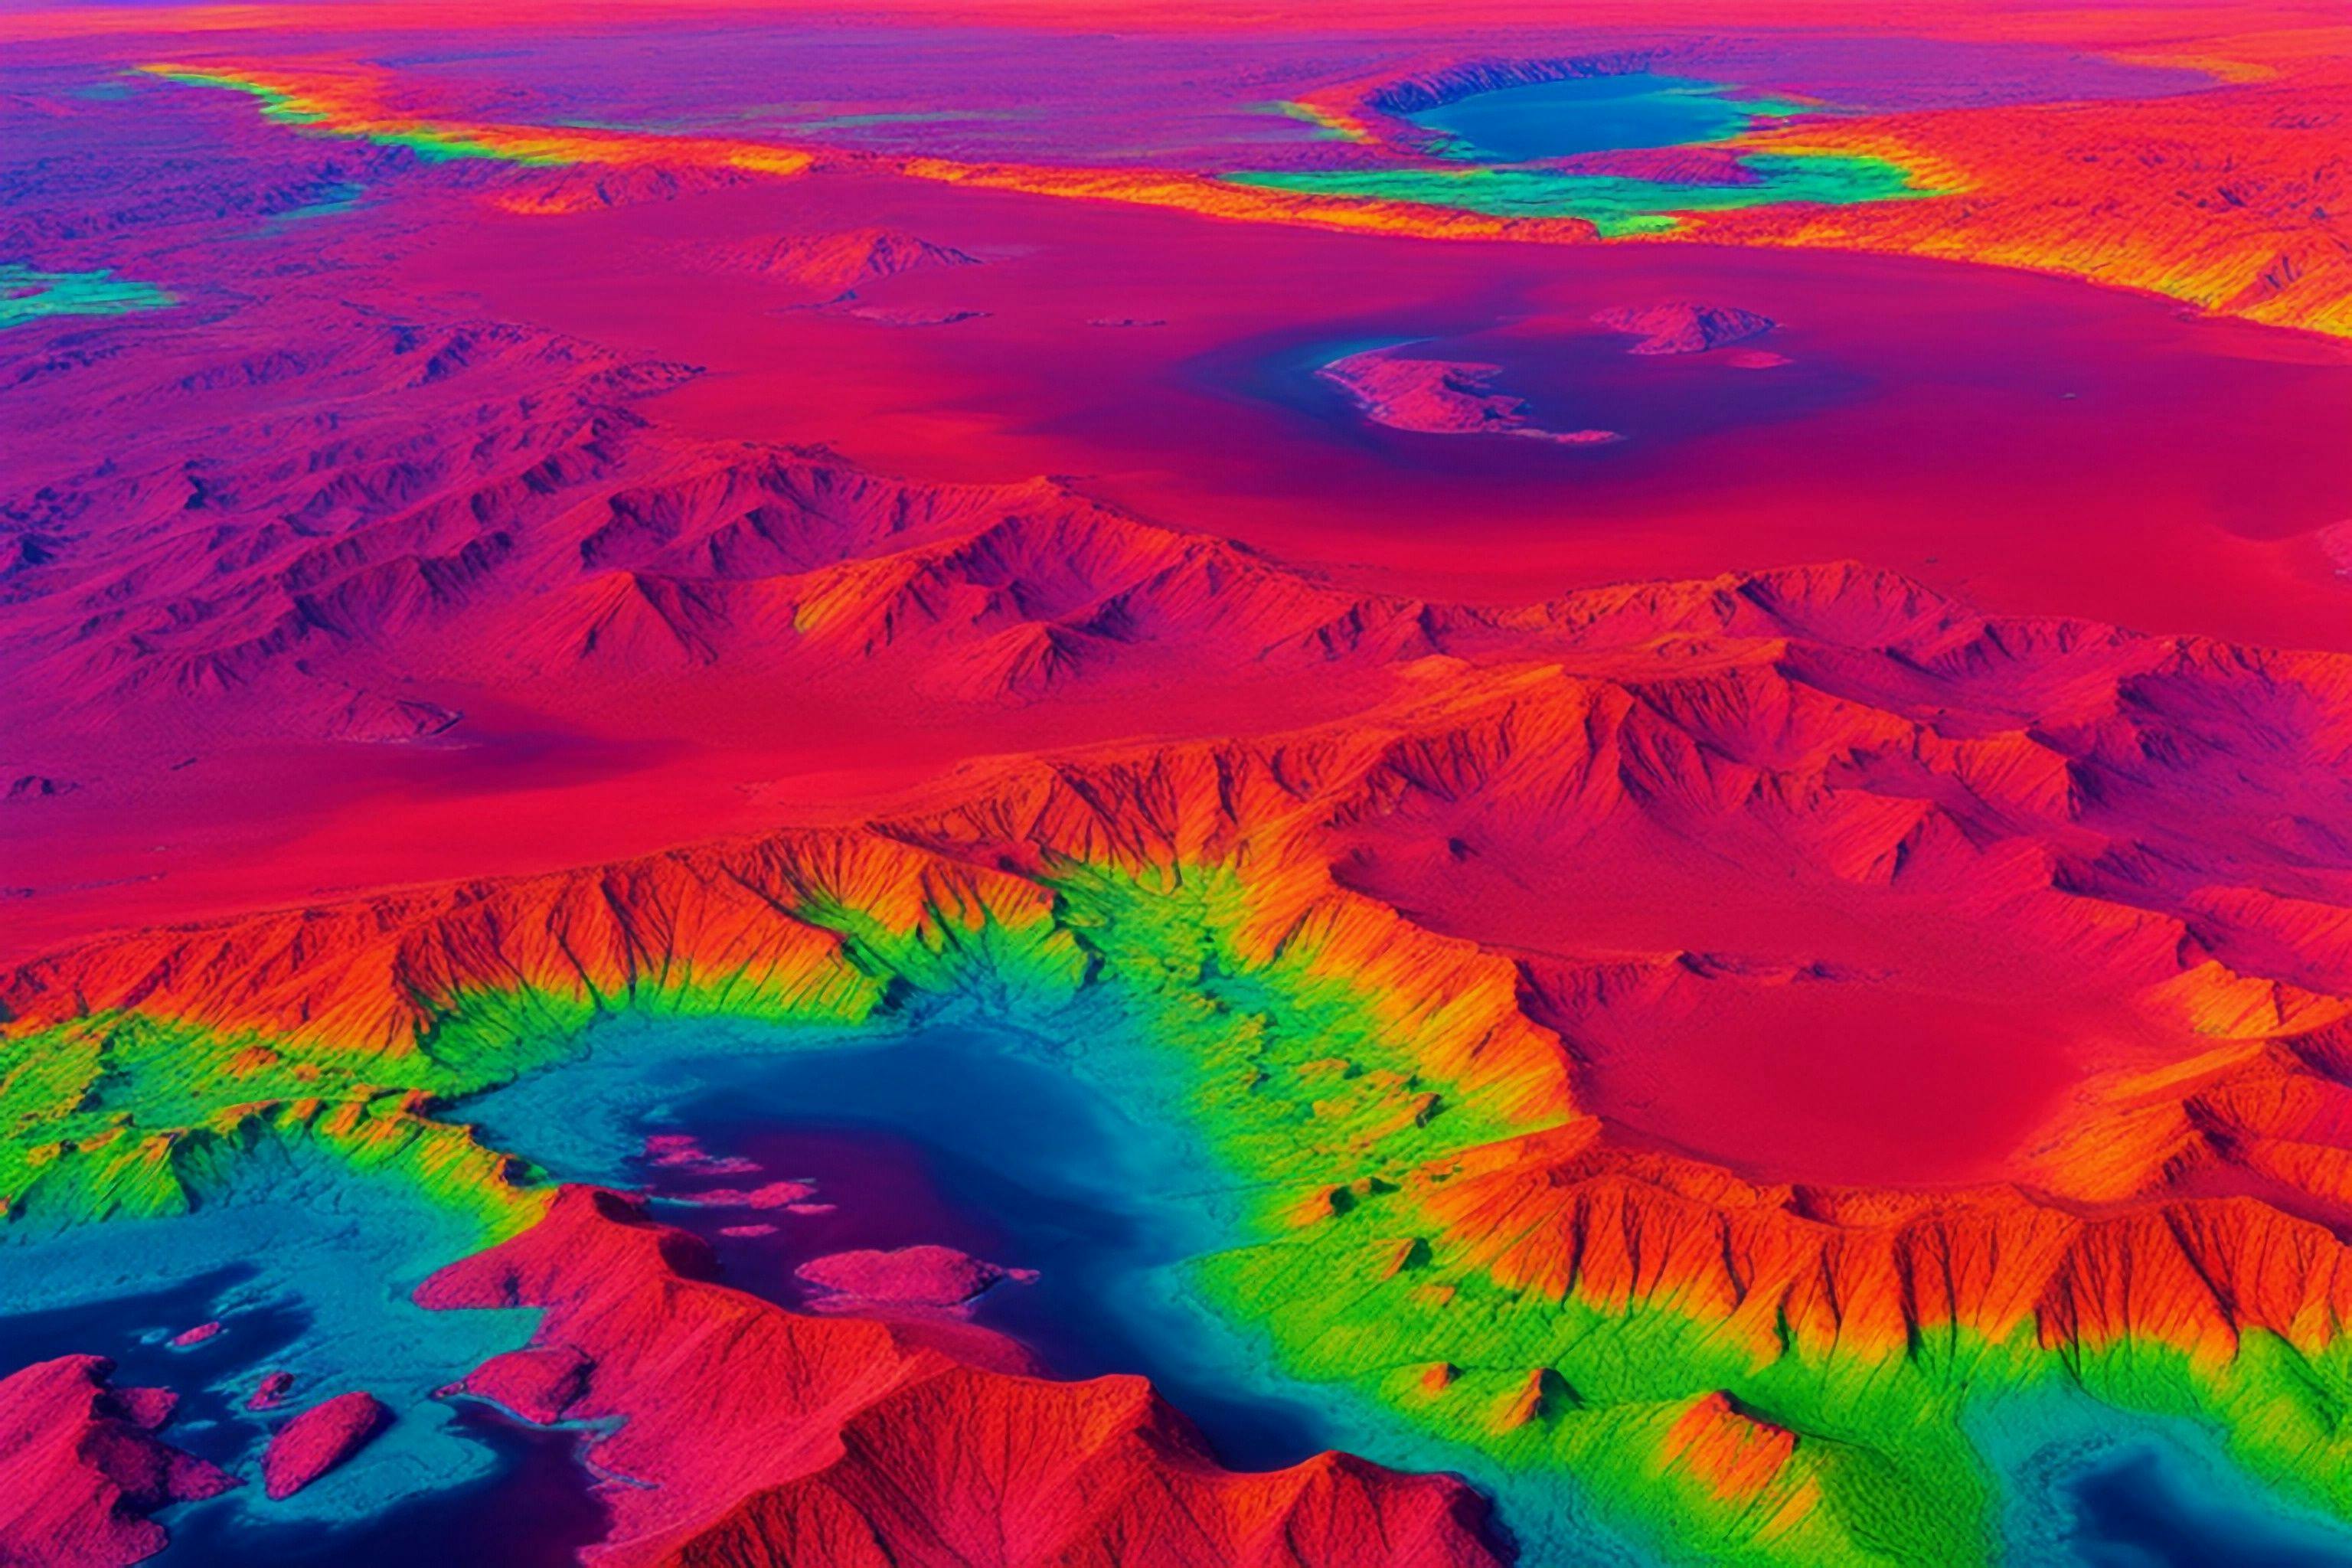 Infrared thermography land mapping of a region with mountains and valleys showing colored gradients of heat due to different soil absorption of solar radiation. Aerial view of thermal scan imaging. | Image Credit: © Sweeann - stock.adobe.com.